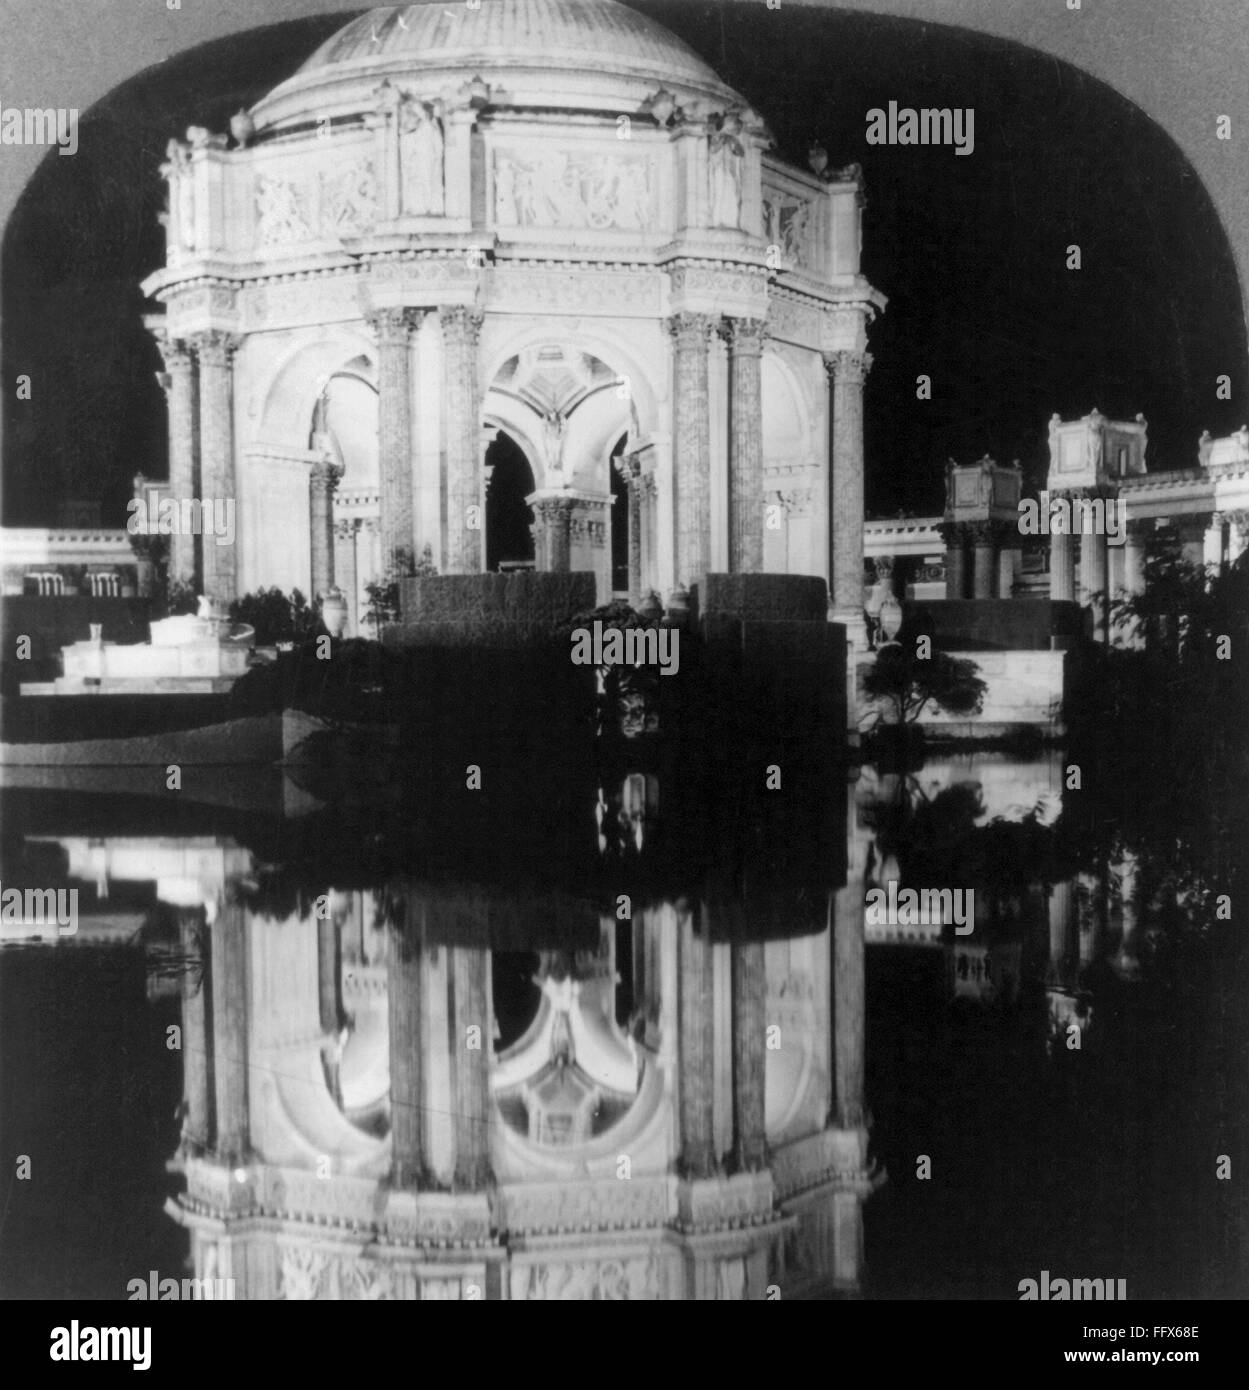 PANAMA-PACIFIC EXPOSITION. /nThe Palace of Fine Arts und Lagune an der Panama-Pacific International Exposition in San Francisco, Kalifornien. Stereograph, 1915. Stockfoto